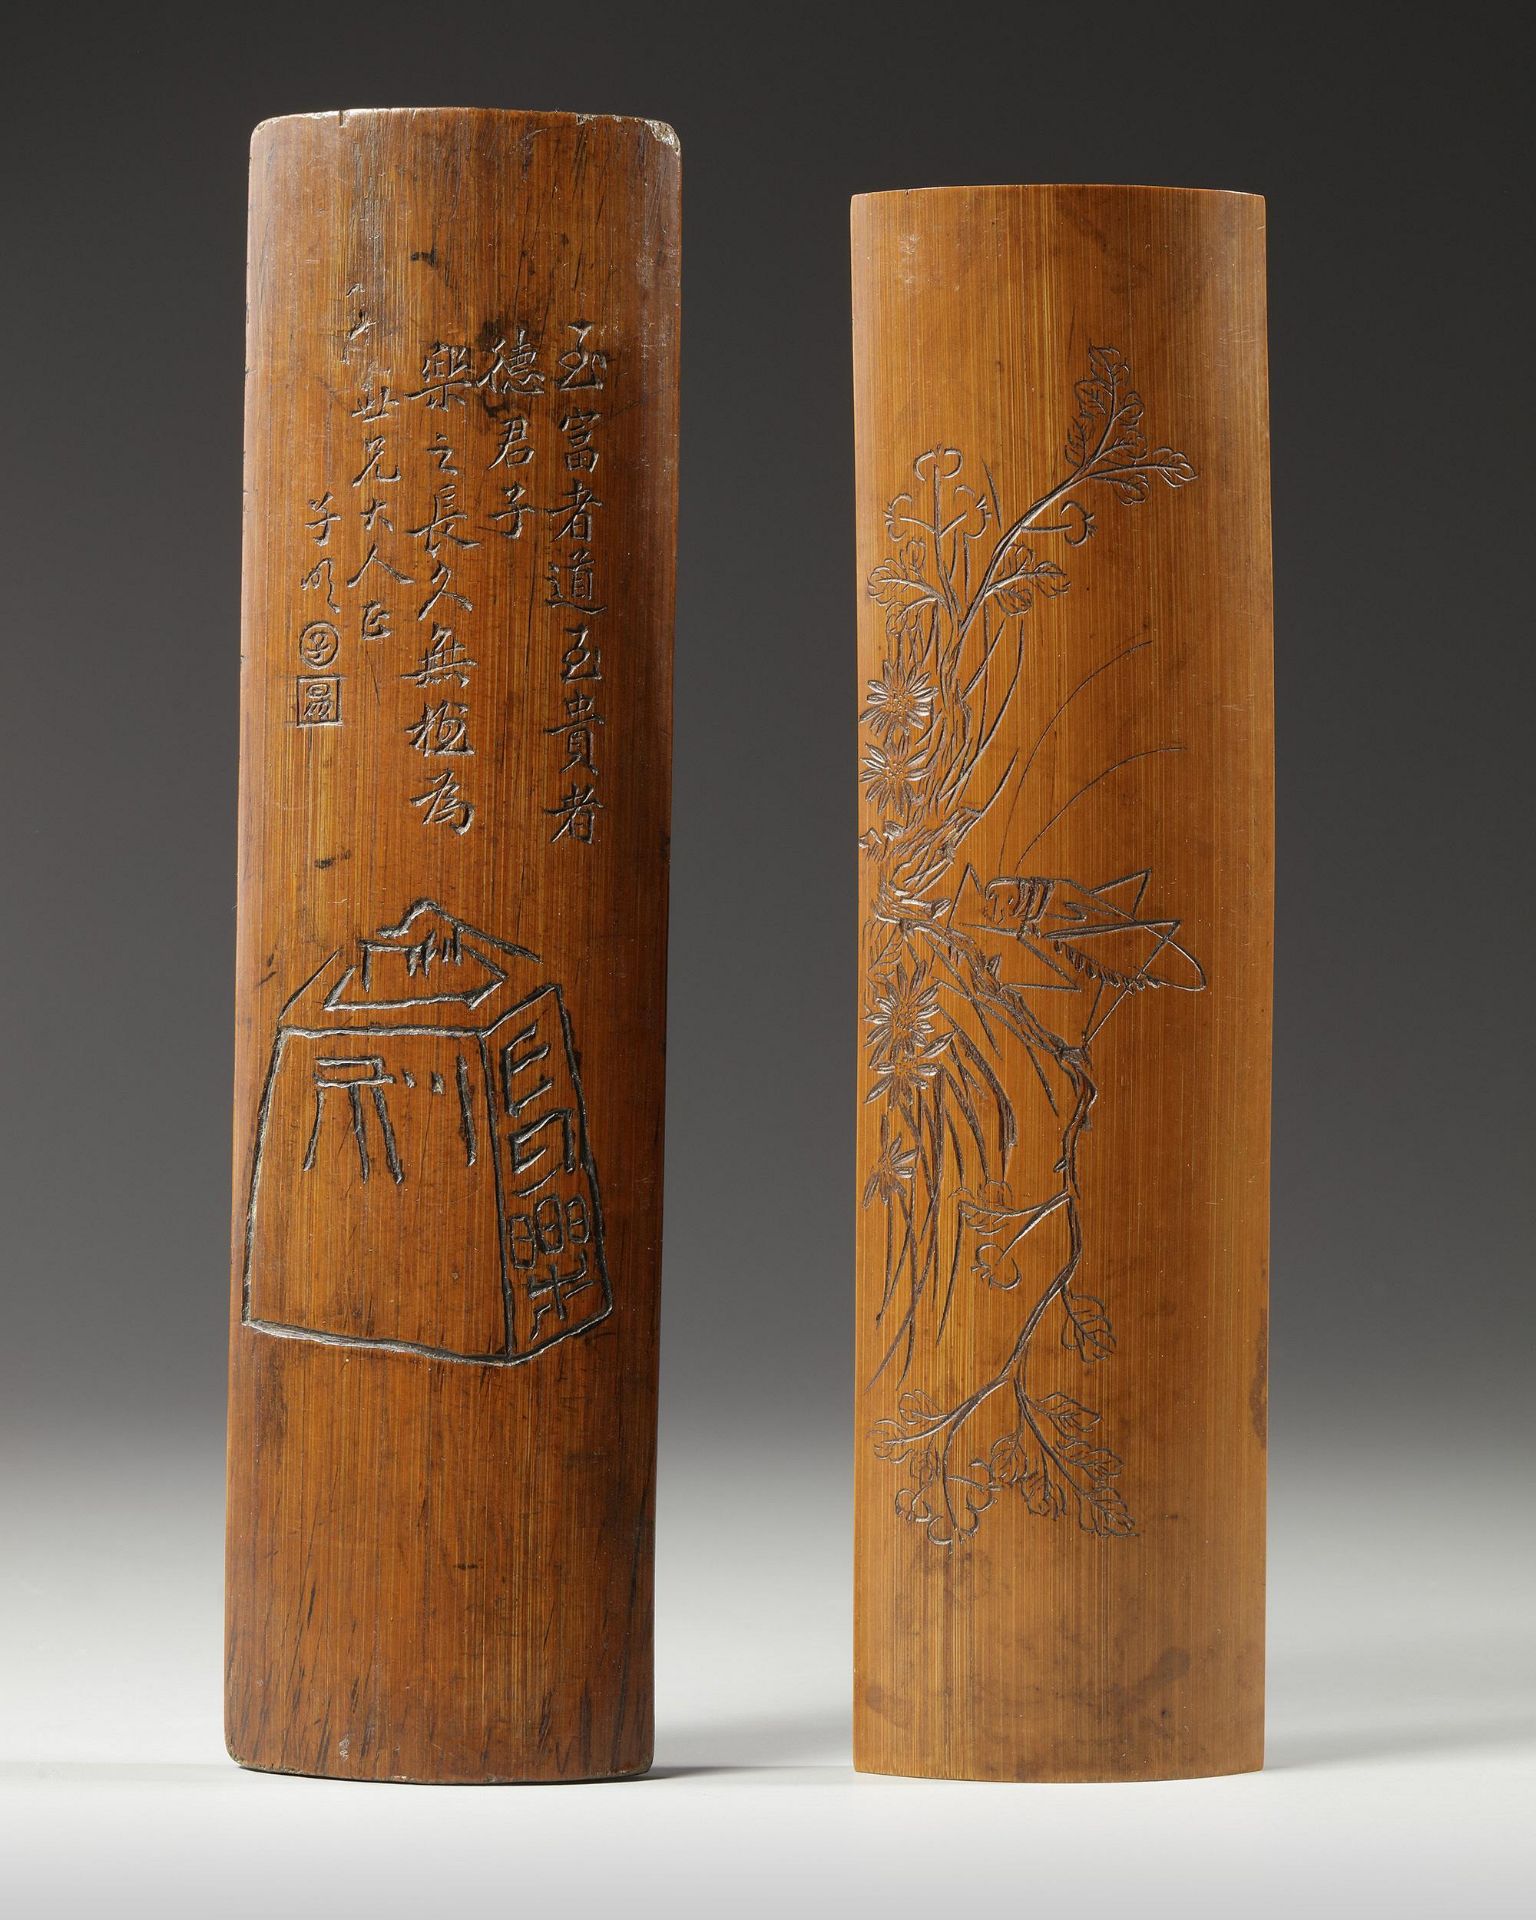 TWO CHINESE BAMBOO WRIST RESTS, 19TH-20TH CENTURY